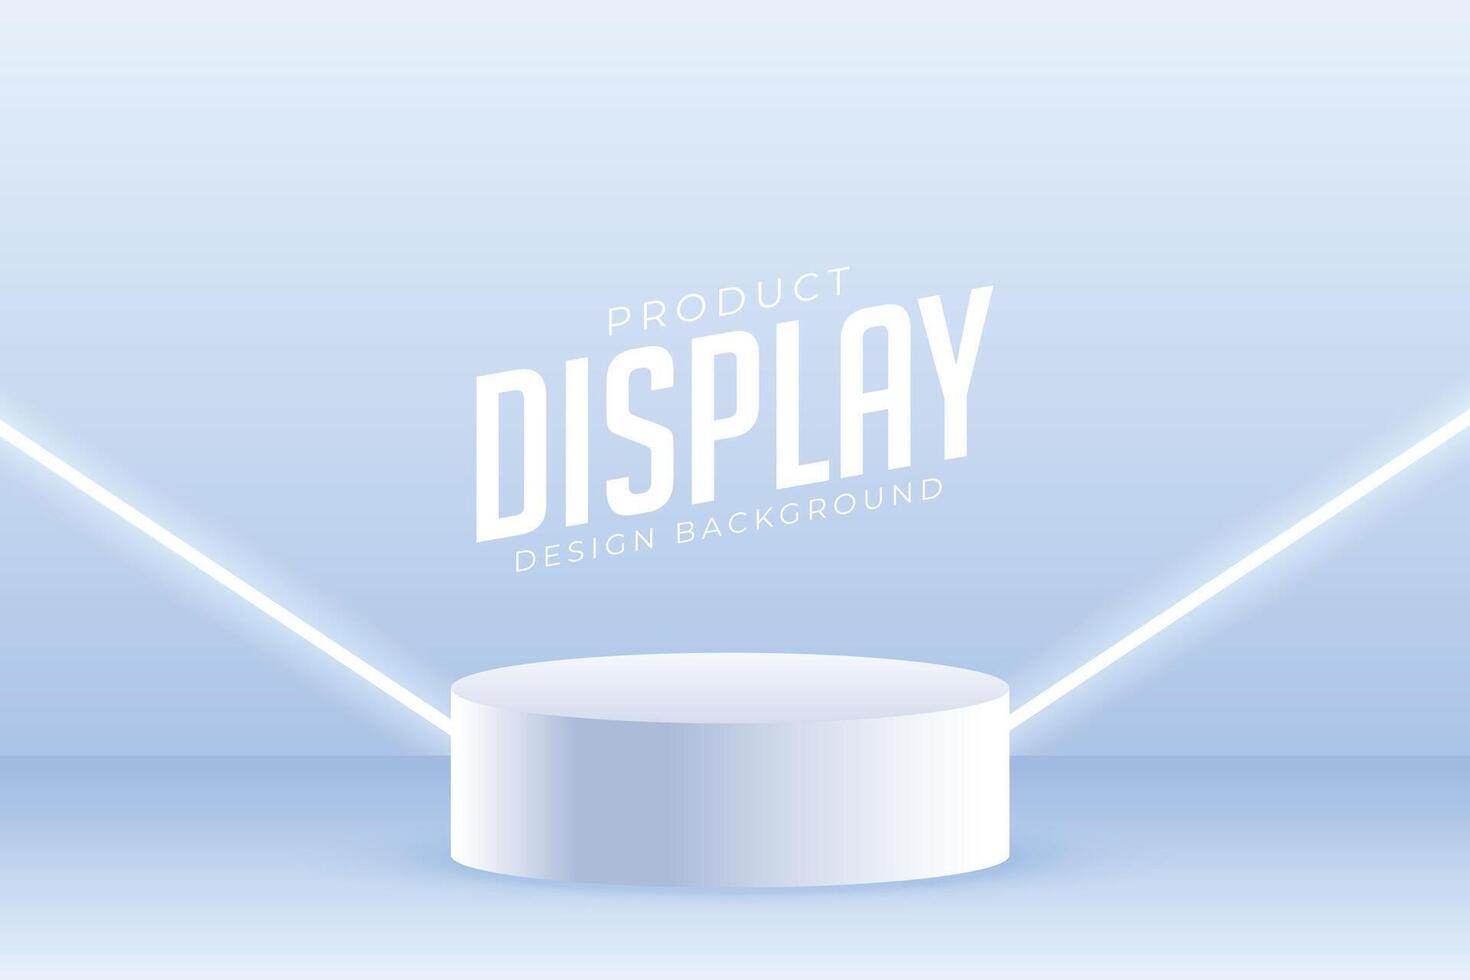 3d podium platform background for product display with glowing lines vector